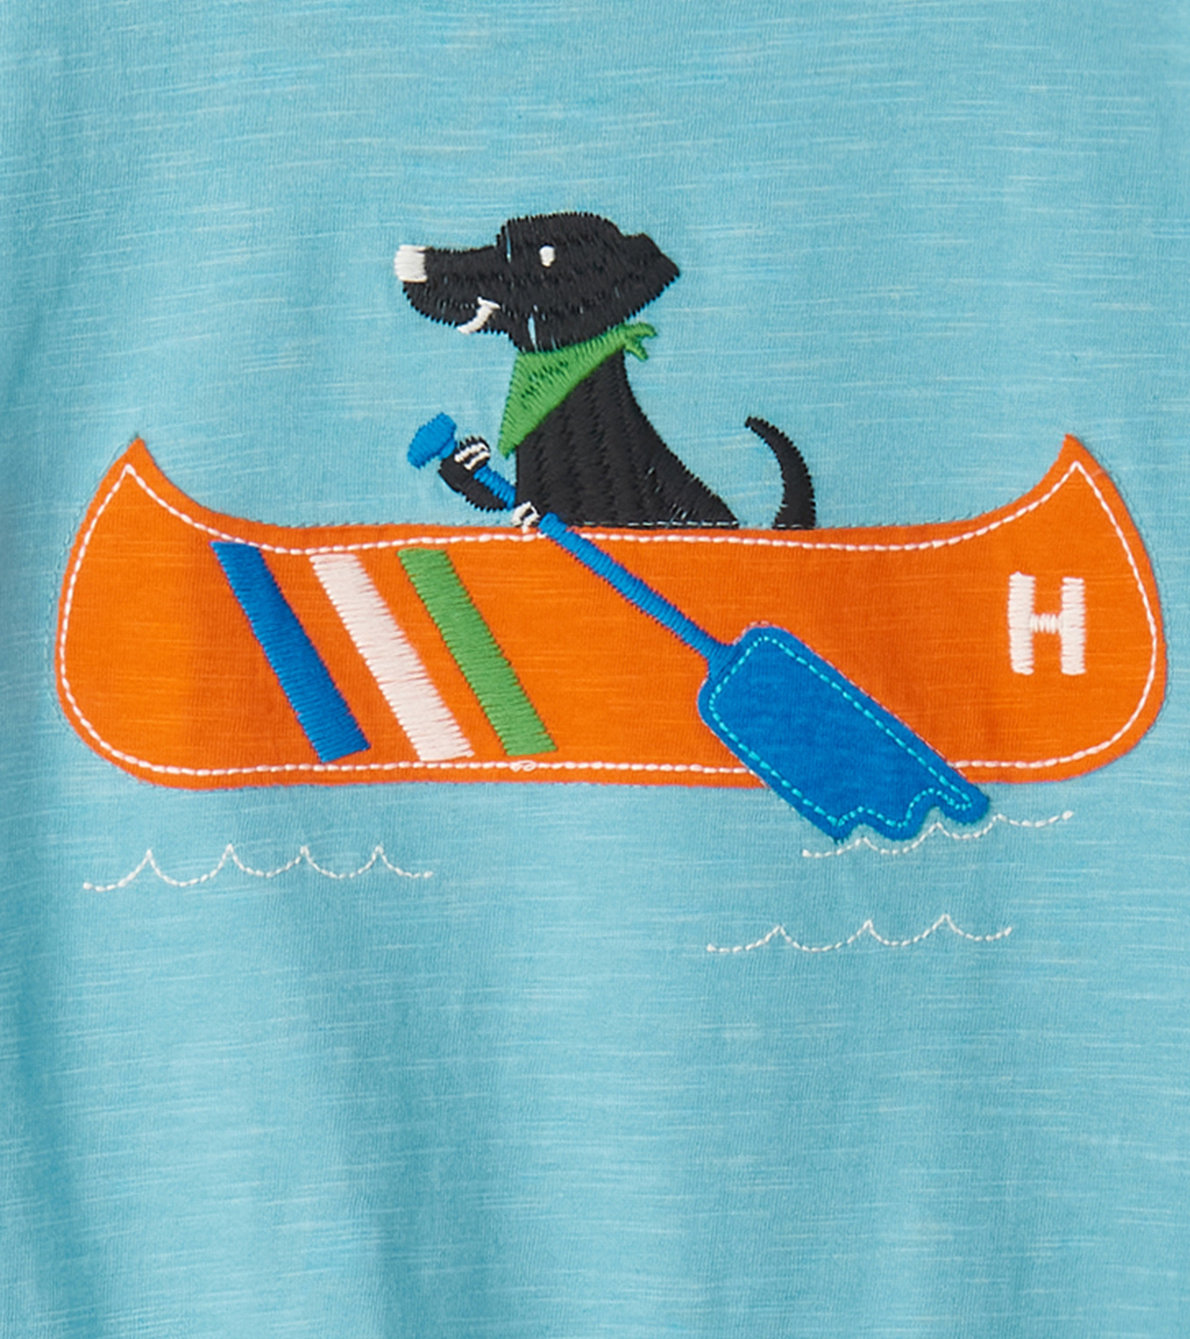 View larger image of Baby & Toddler Boys Canoe Do It Graphic Tee